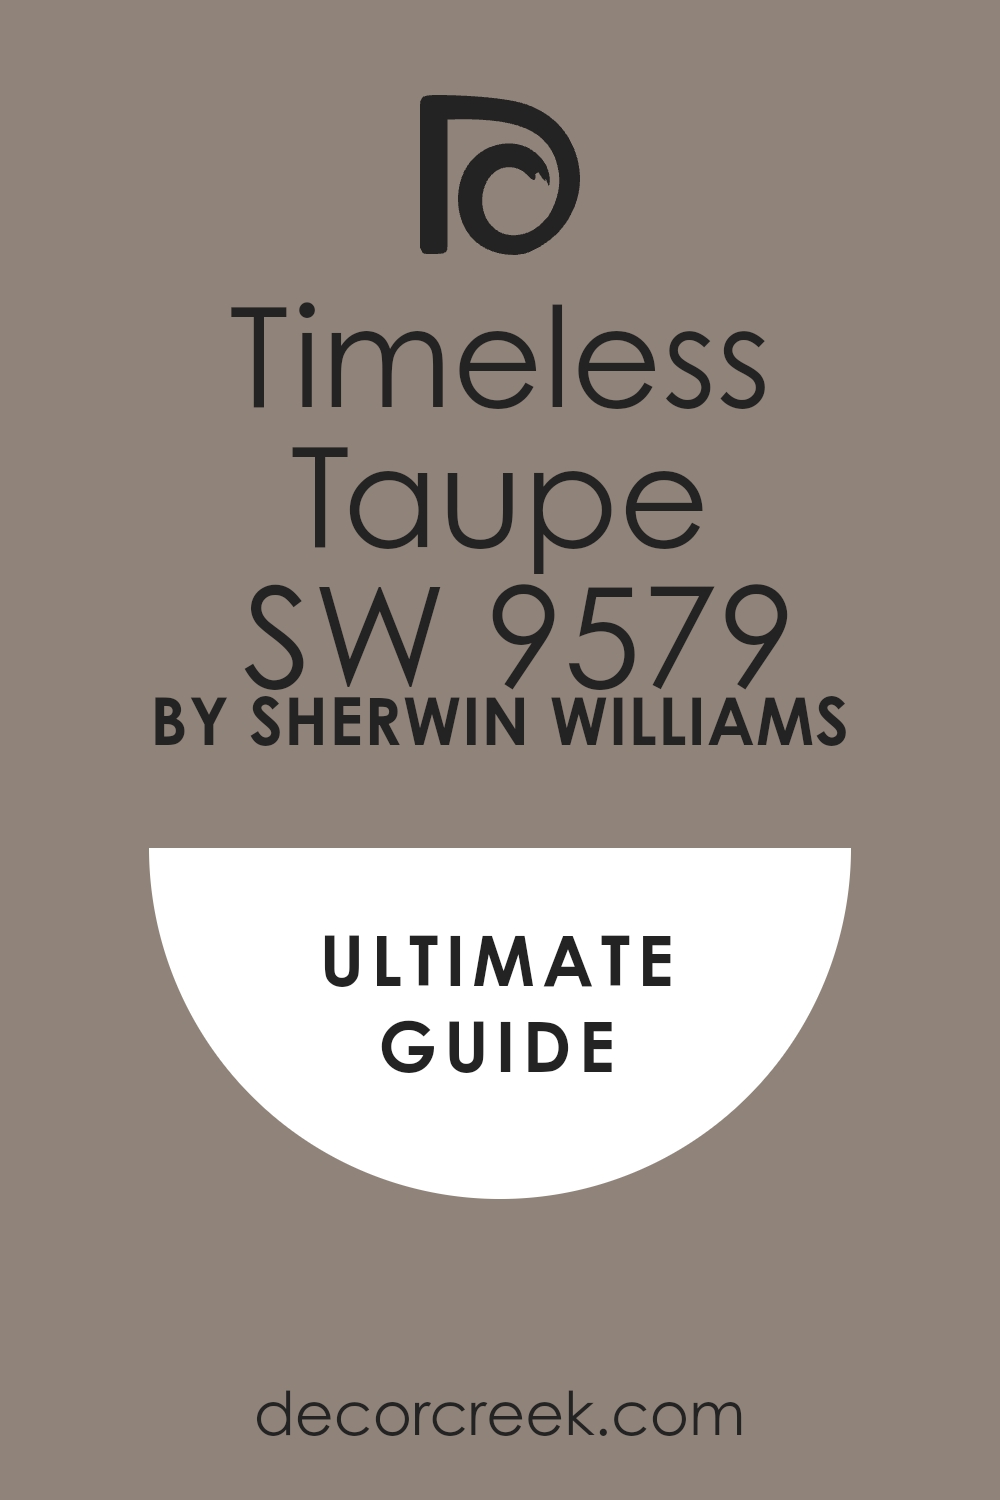 timeless_taupe_sw_9579_paint_color_by_sherwin_williams_ultimate_guide